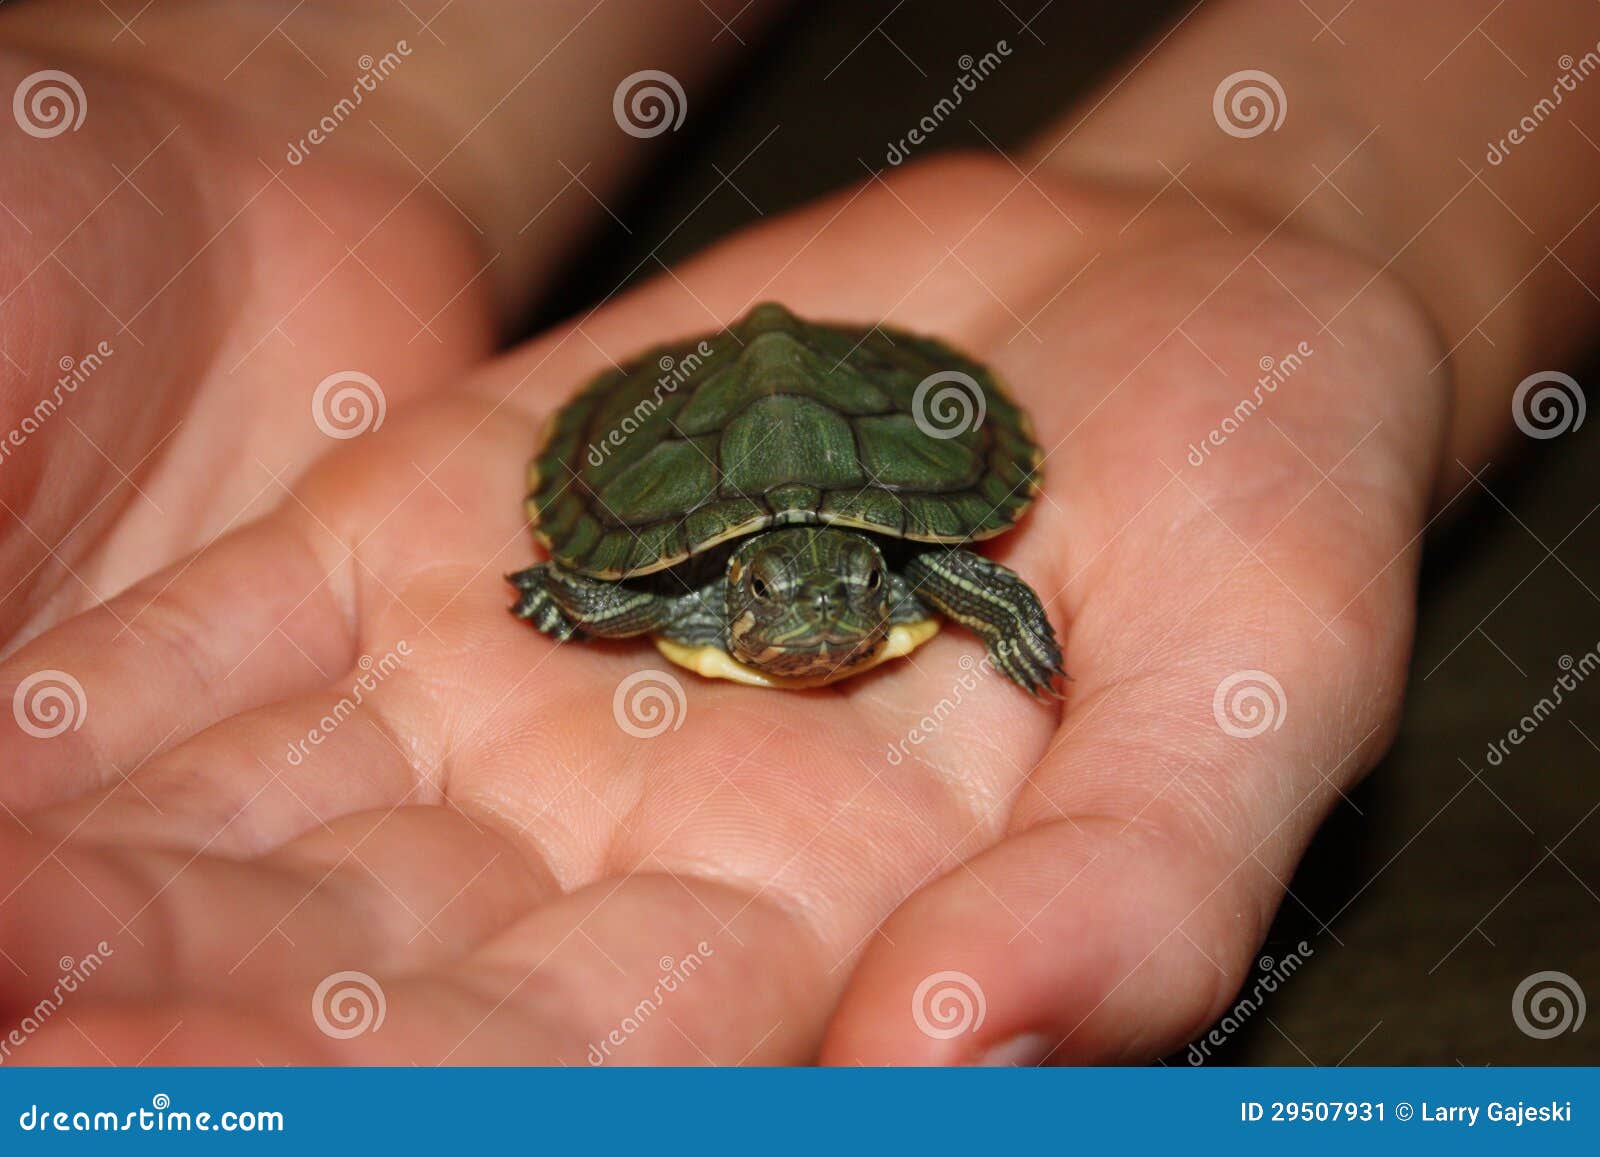 Red Eared Slider Baby Turtle Stock Image - Image of youth, turtle: 29507931